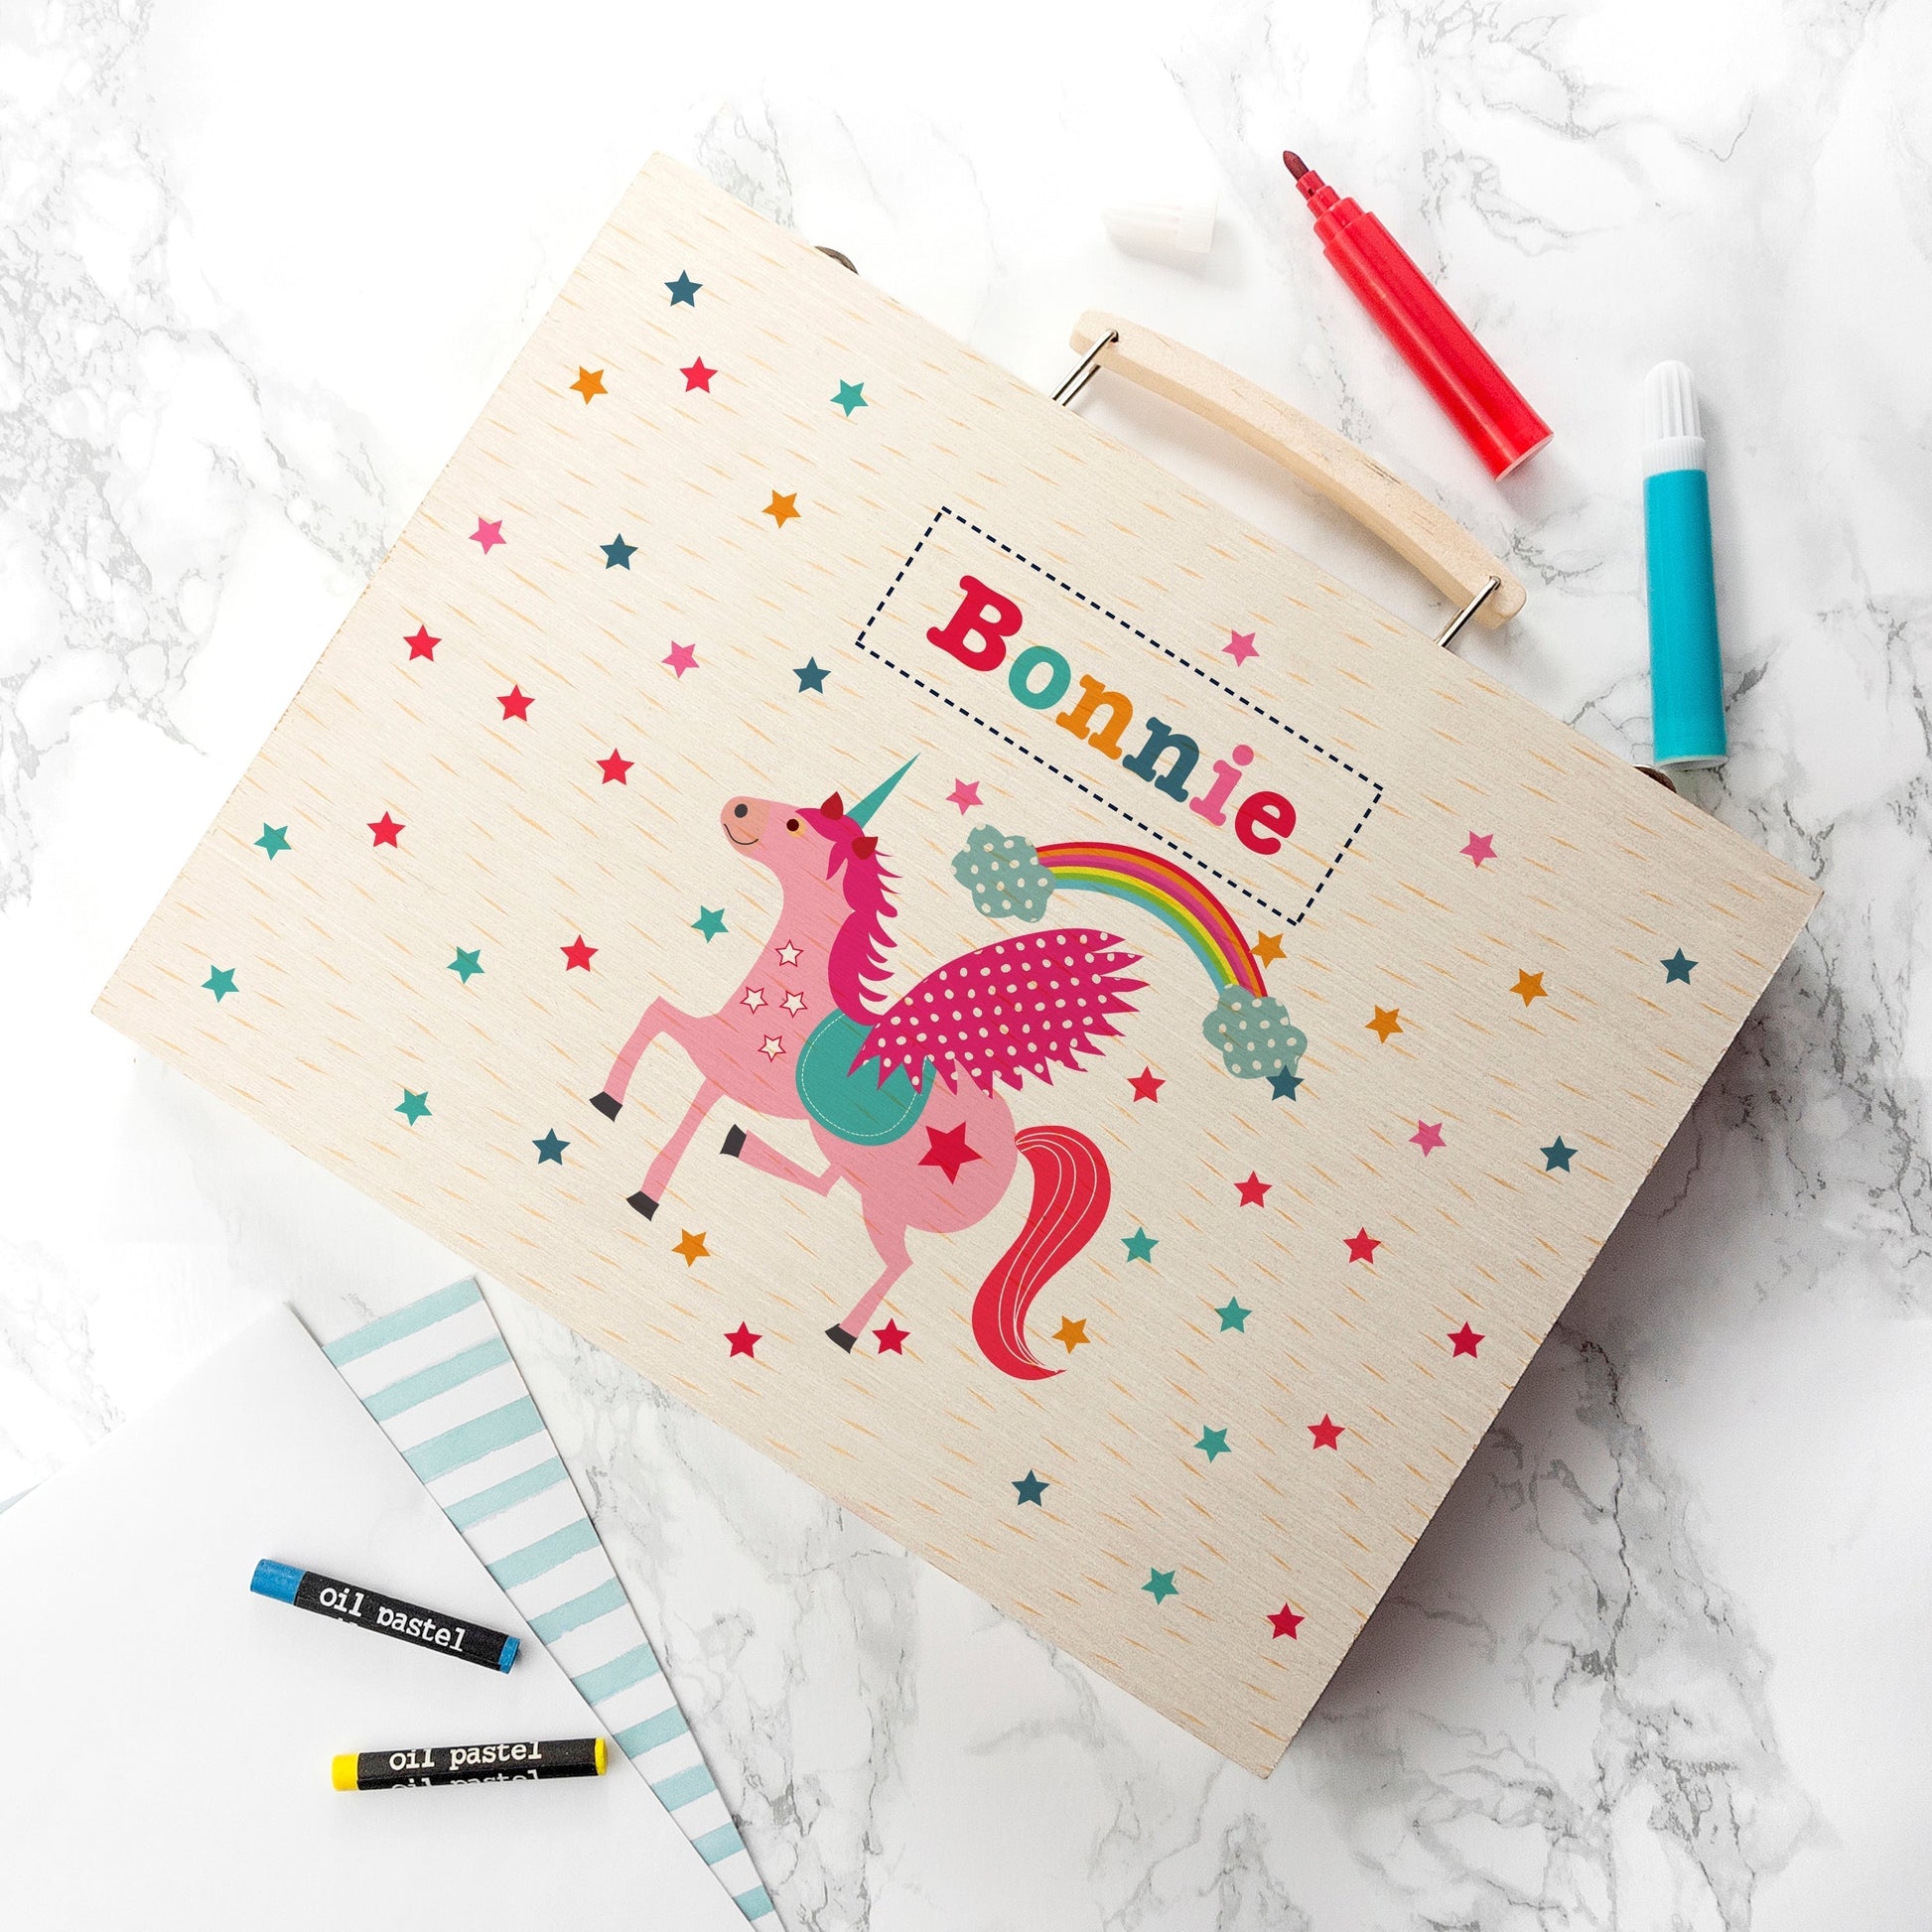 Personalized Art and Craft Sets - Personalized Kid’s Unicorn Colouring Set 